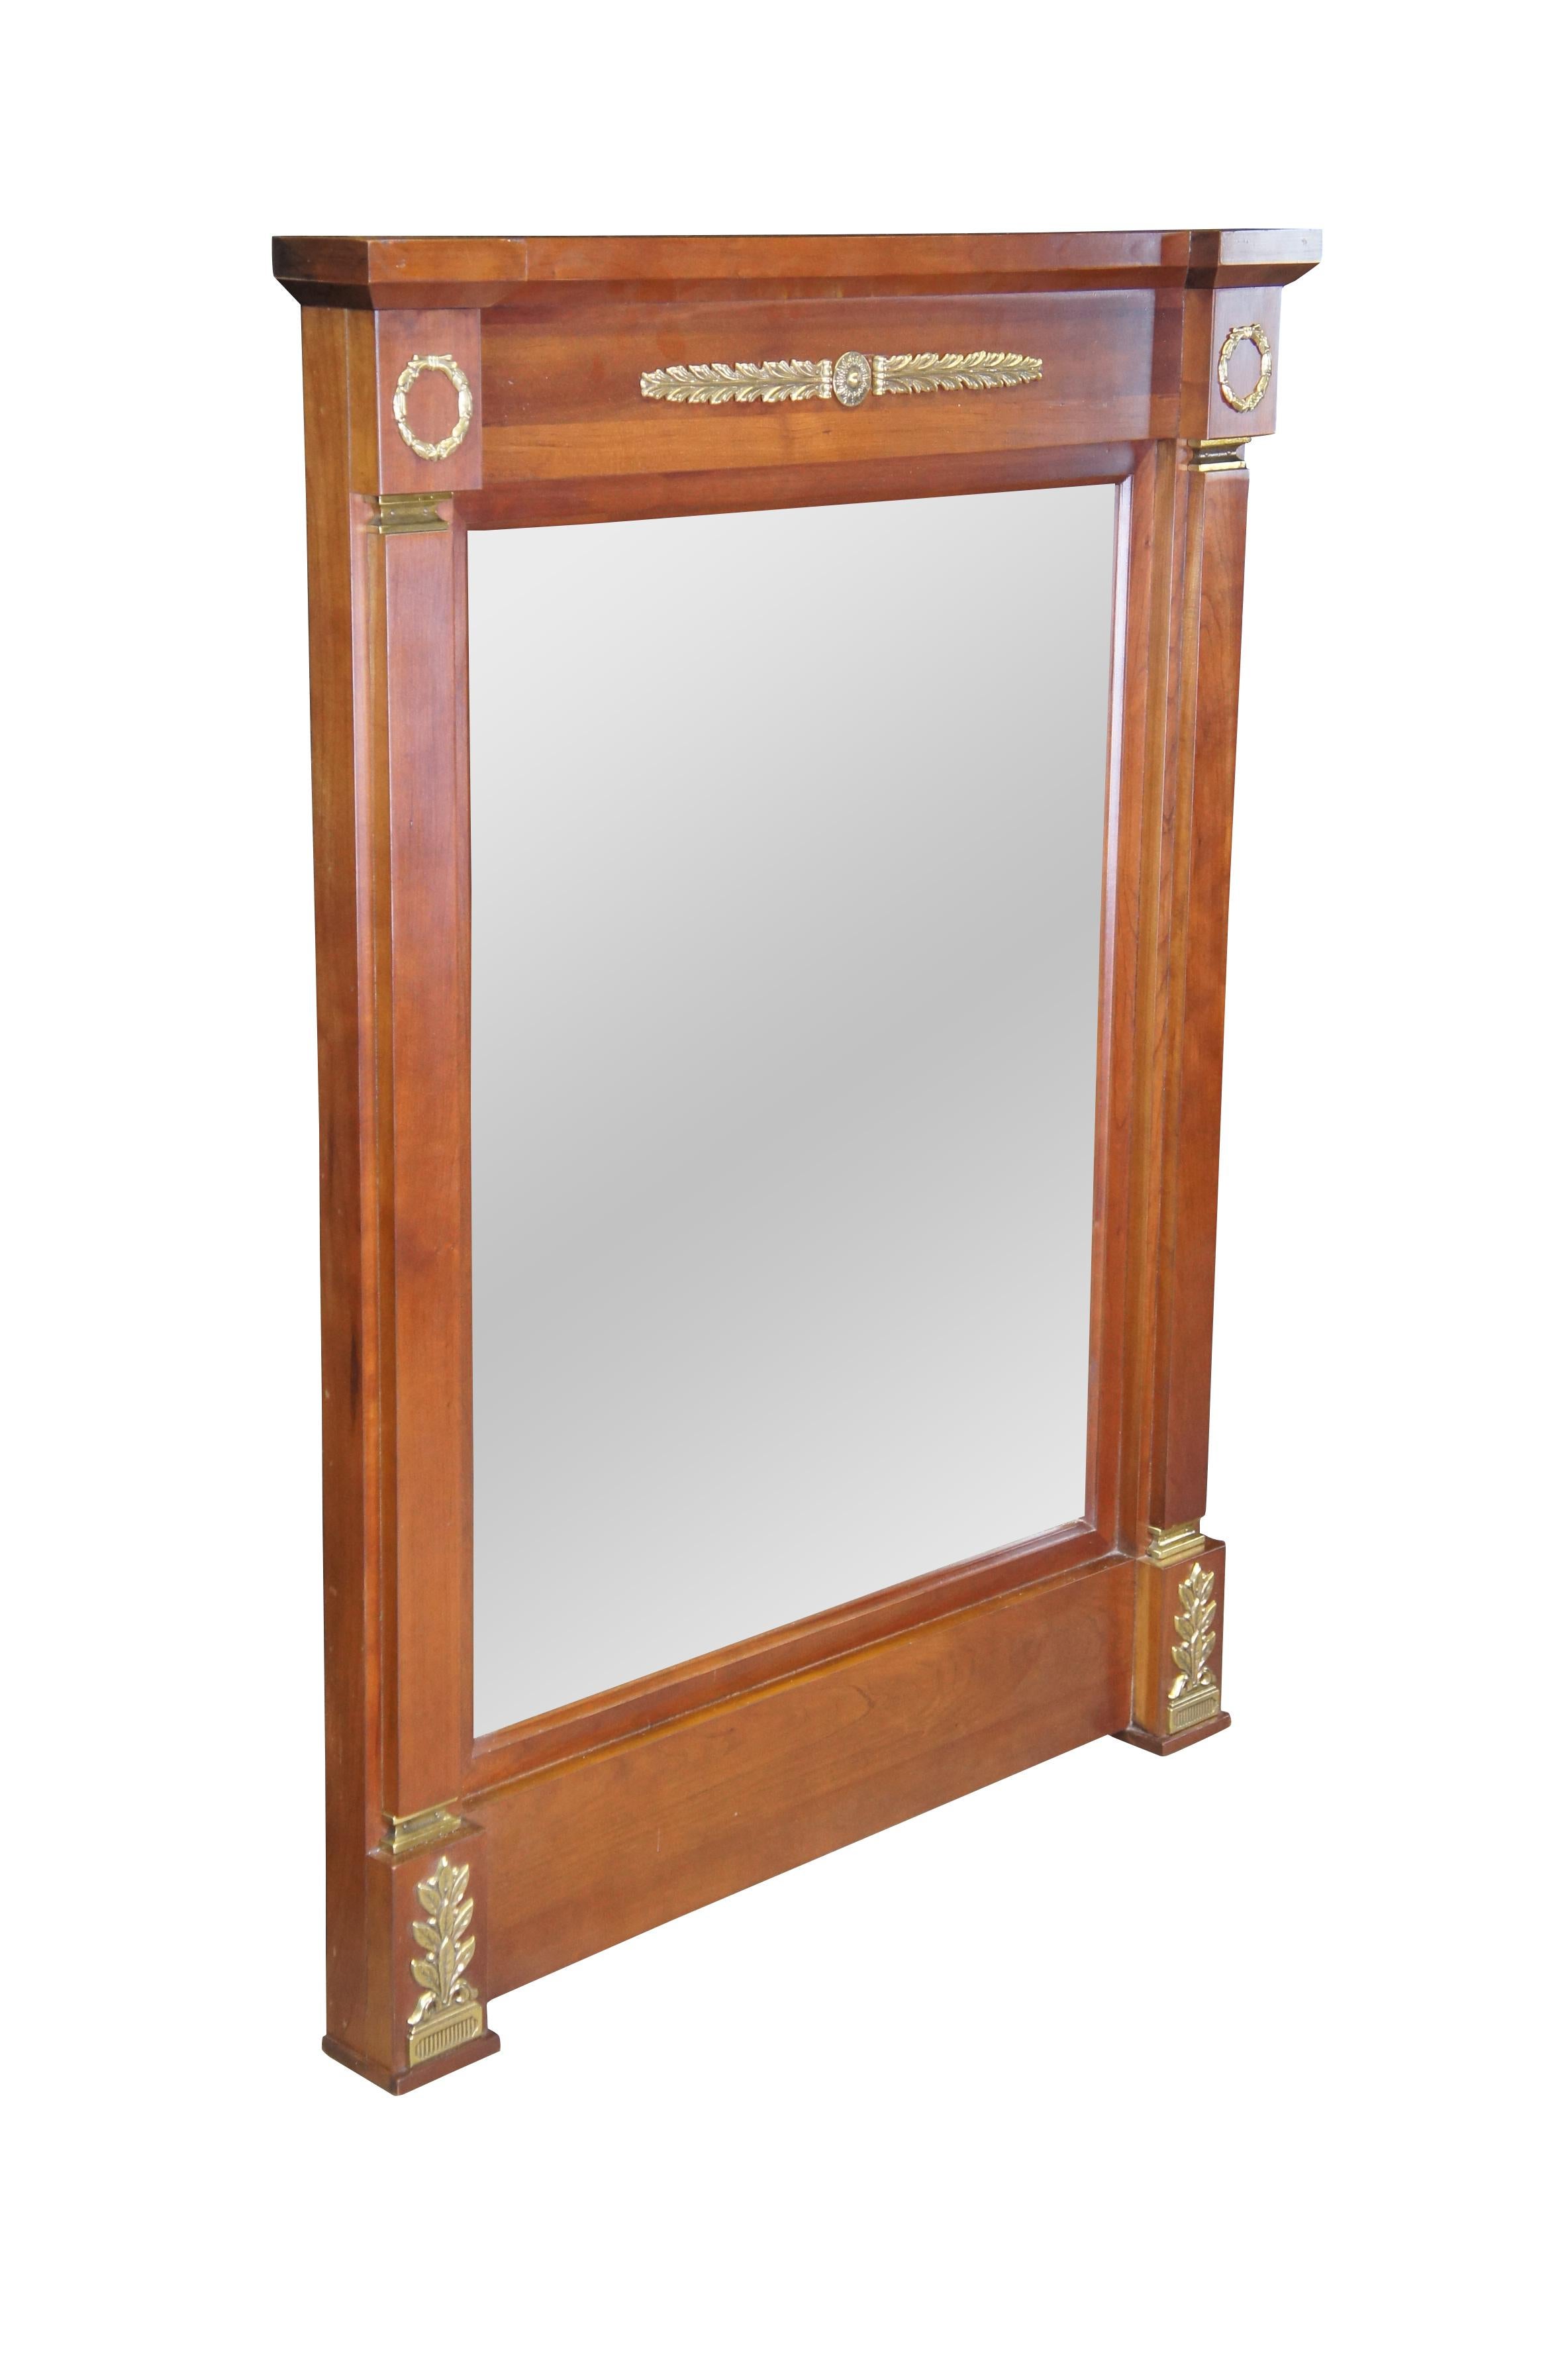 An elegant French Empire style wall hanging or over mantel mirror by Harden Furniture, circa 1980s.  Made from solid cherry with tapered columns, Neoclassical ormolu mounts and beveled plate glass.  

Harden was founded in 1844 by Charles S. Harden.